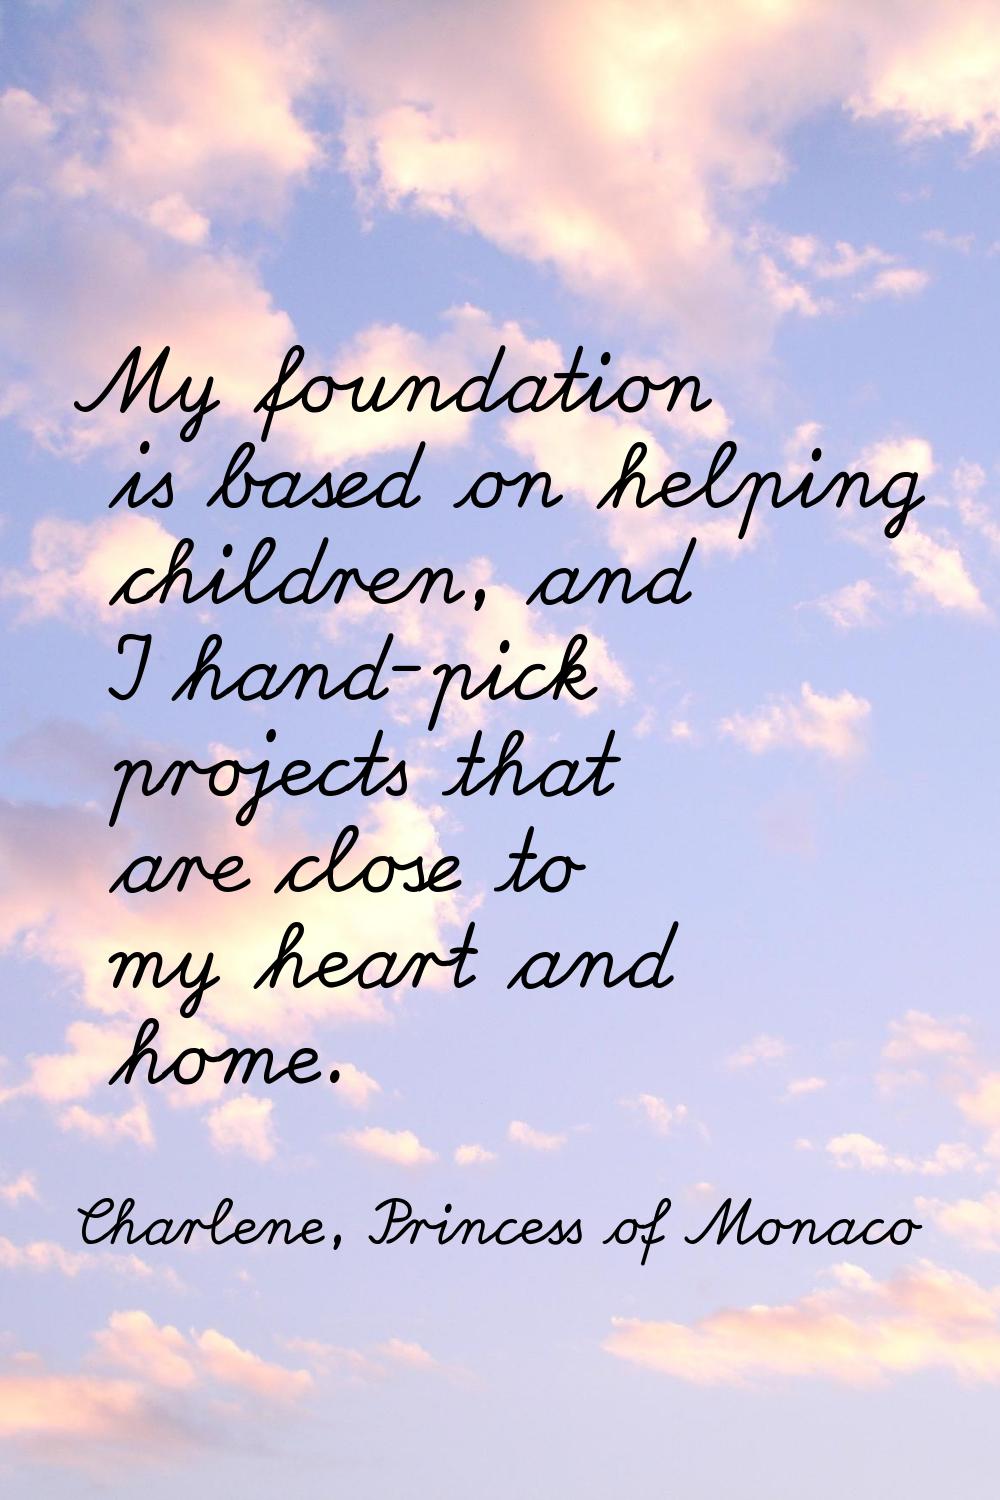 My foundation is based on helping children, and I hand-pick projects that are close to my heart and